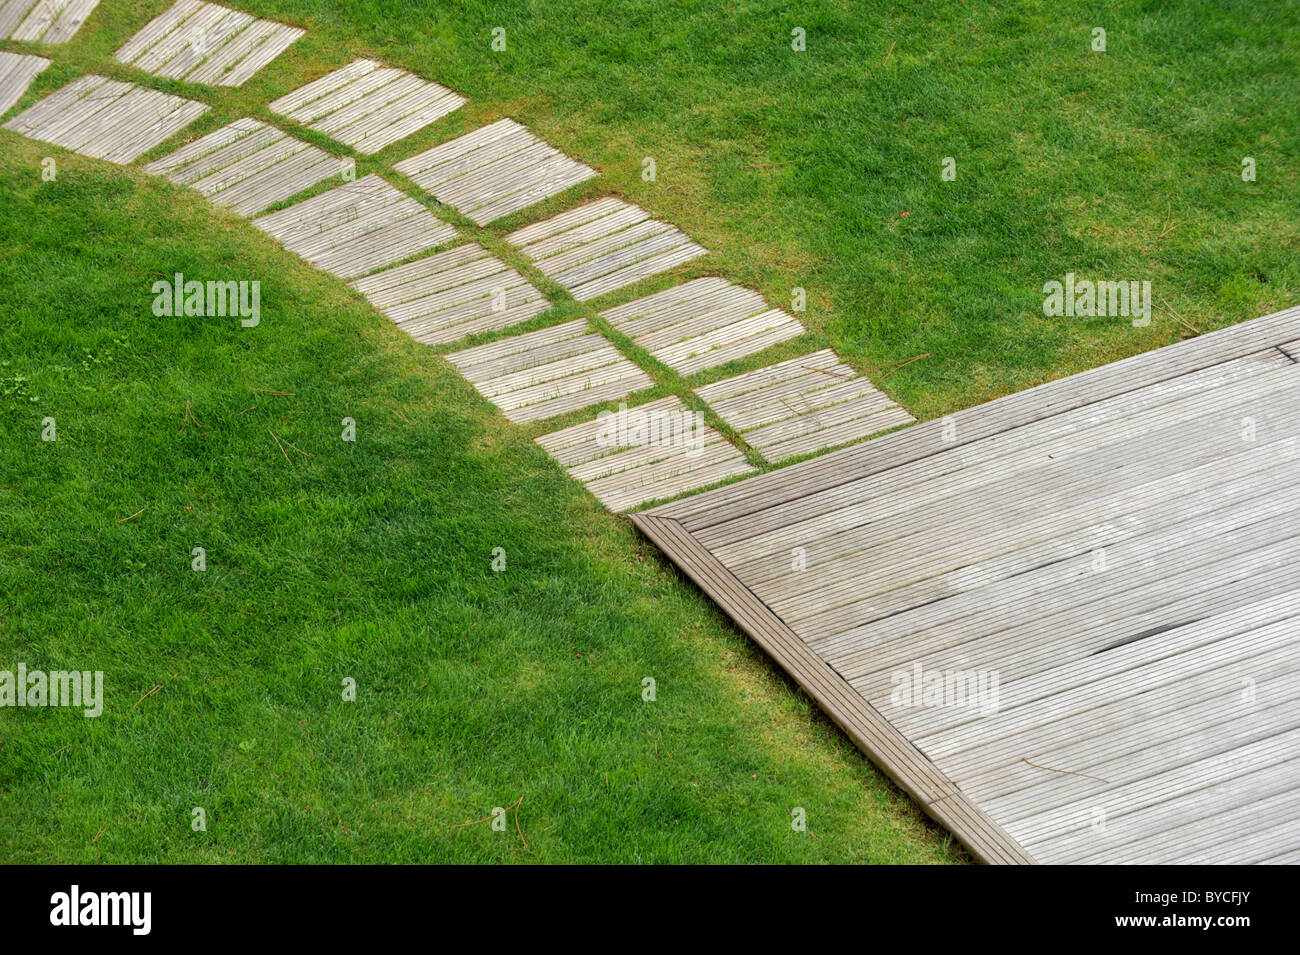 Detail of wood deck on garden lawn viewed from above Stock Photo